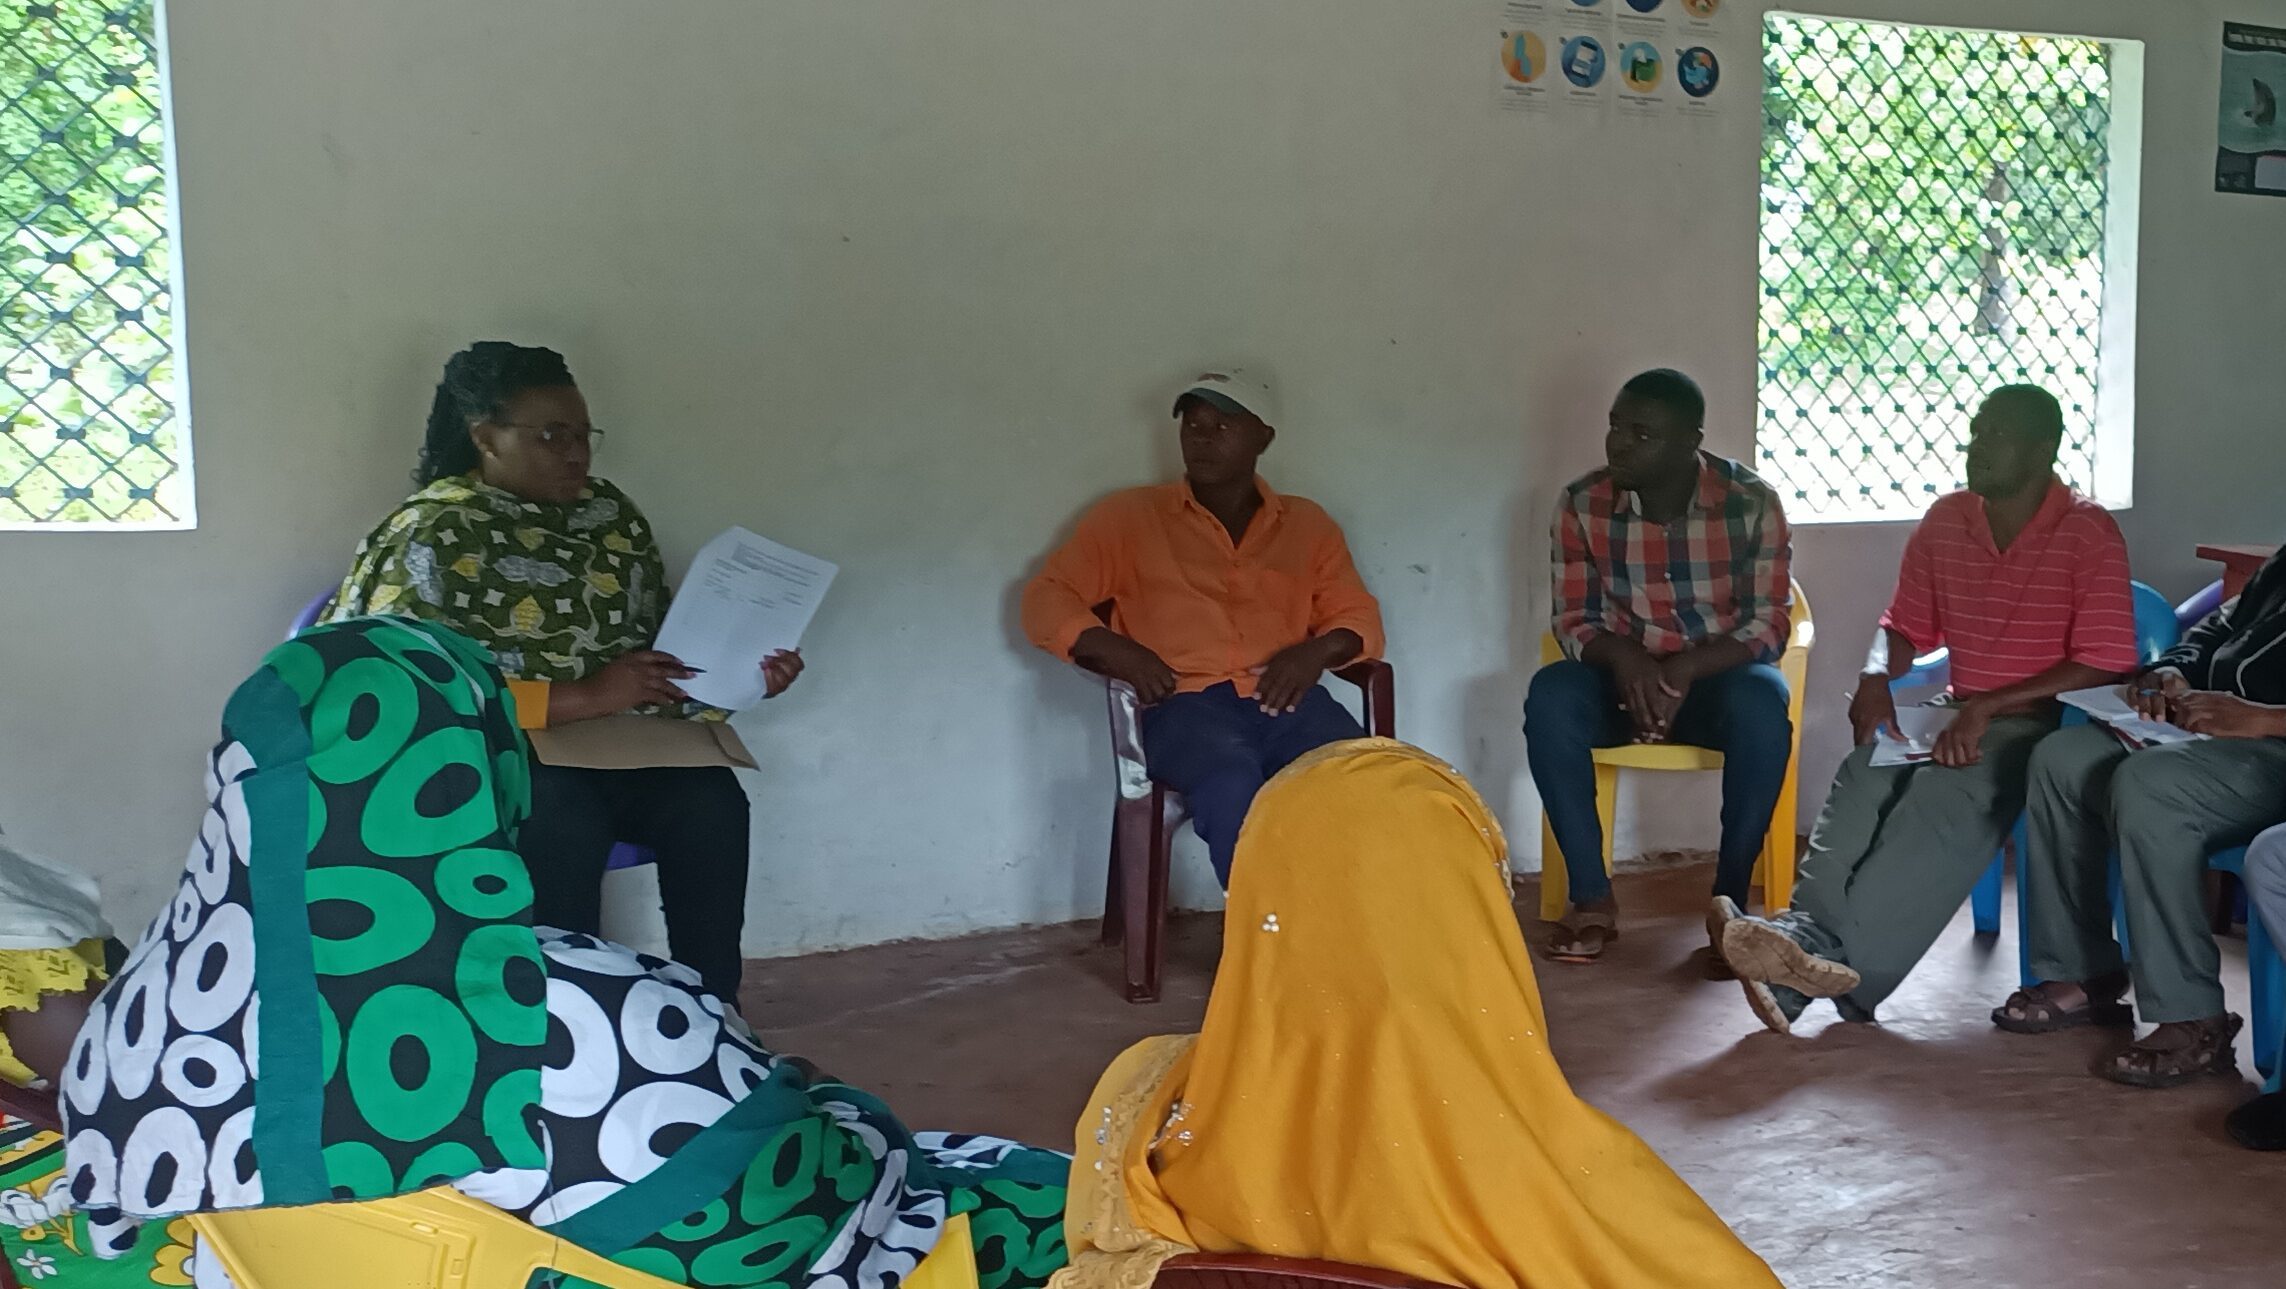 Annah Katuki, a Gender Advisor with Plan International, conducting a gender-based analysis of the impact of the drought in Kilifi County, Kenya